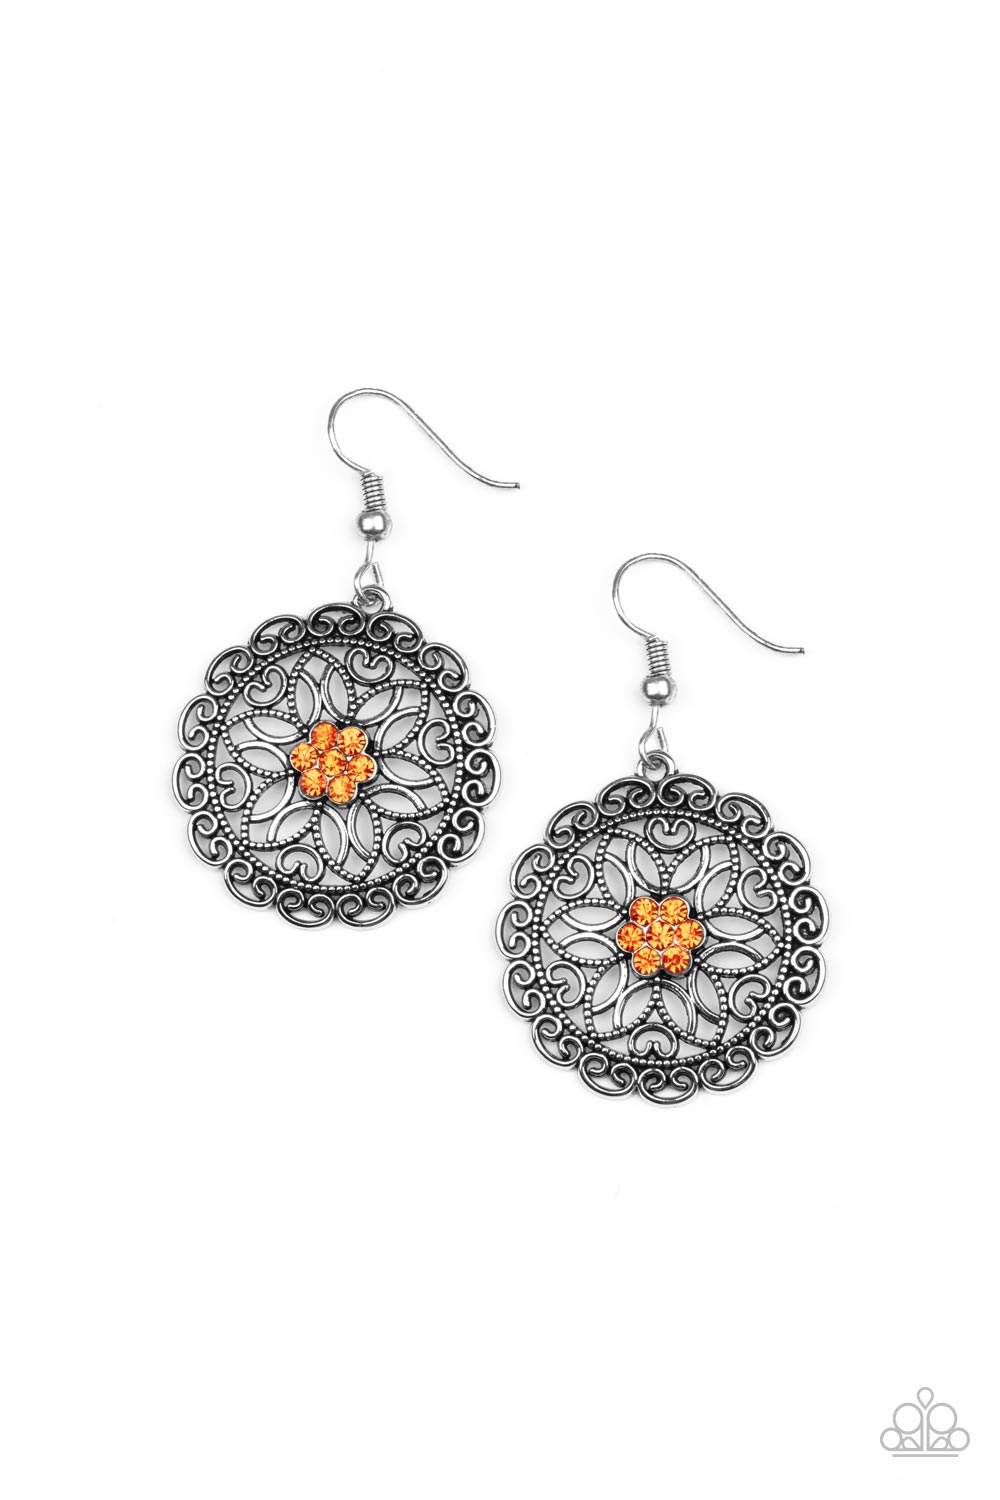 Flower Shop Sparkle - Sparkly Orange and Silver Earrings - Paparazzi Accessories - Silver petals fan out from a sparkly orange rhinestone center inside a frilly ring of silver filigree, resulting in a whimsical floral stylish fashion earrings.